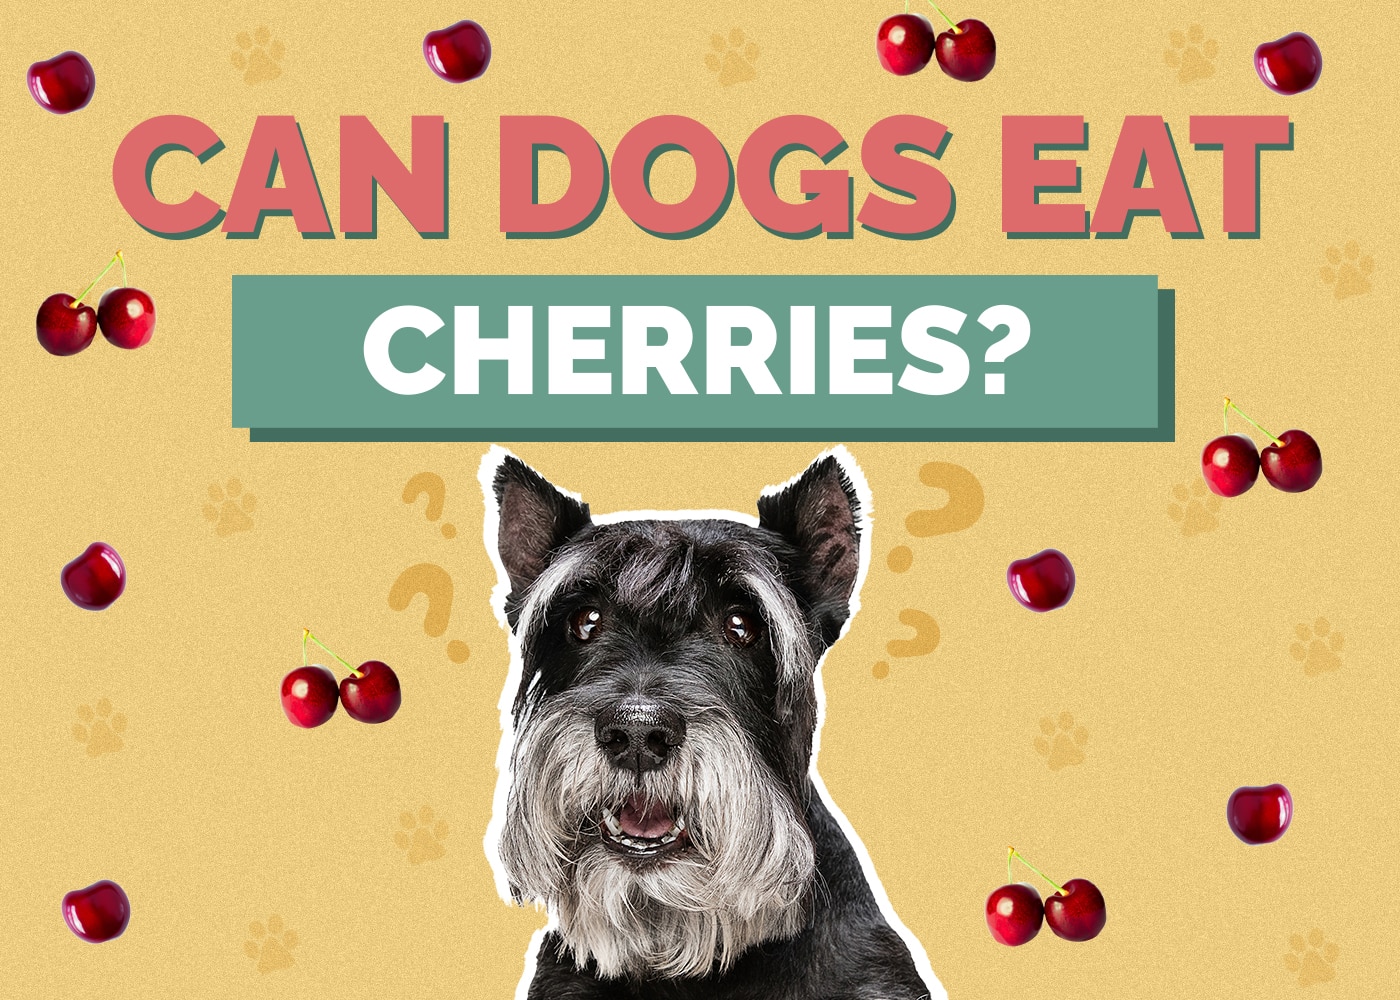 Can Dog Eat cherries